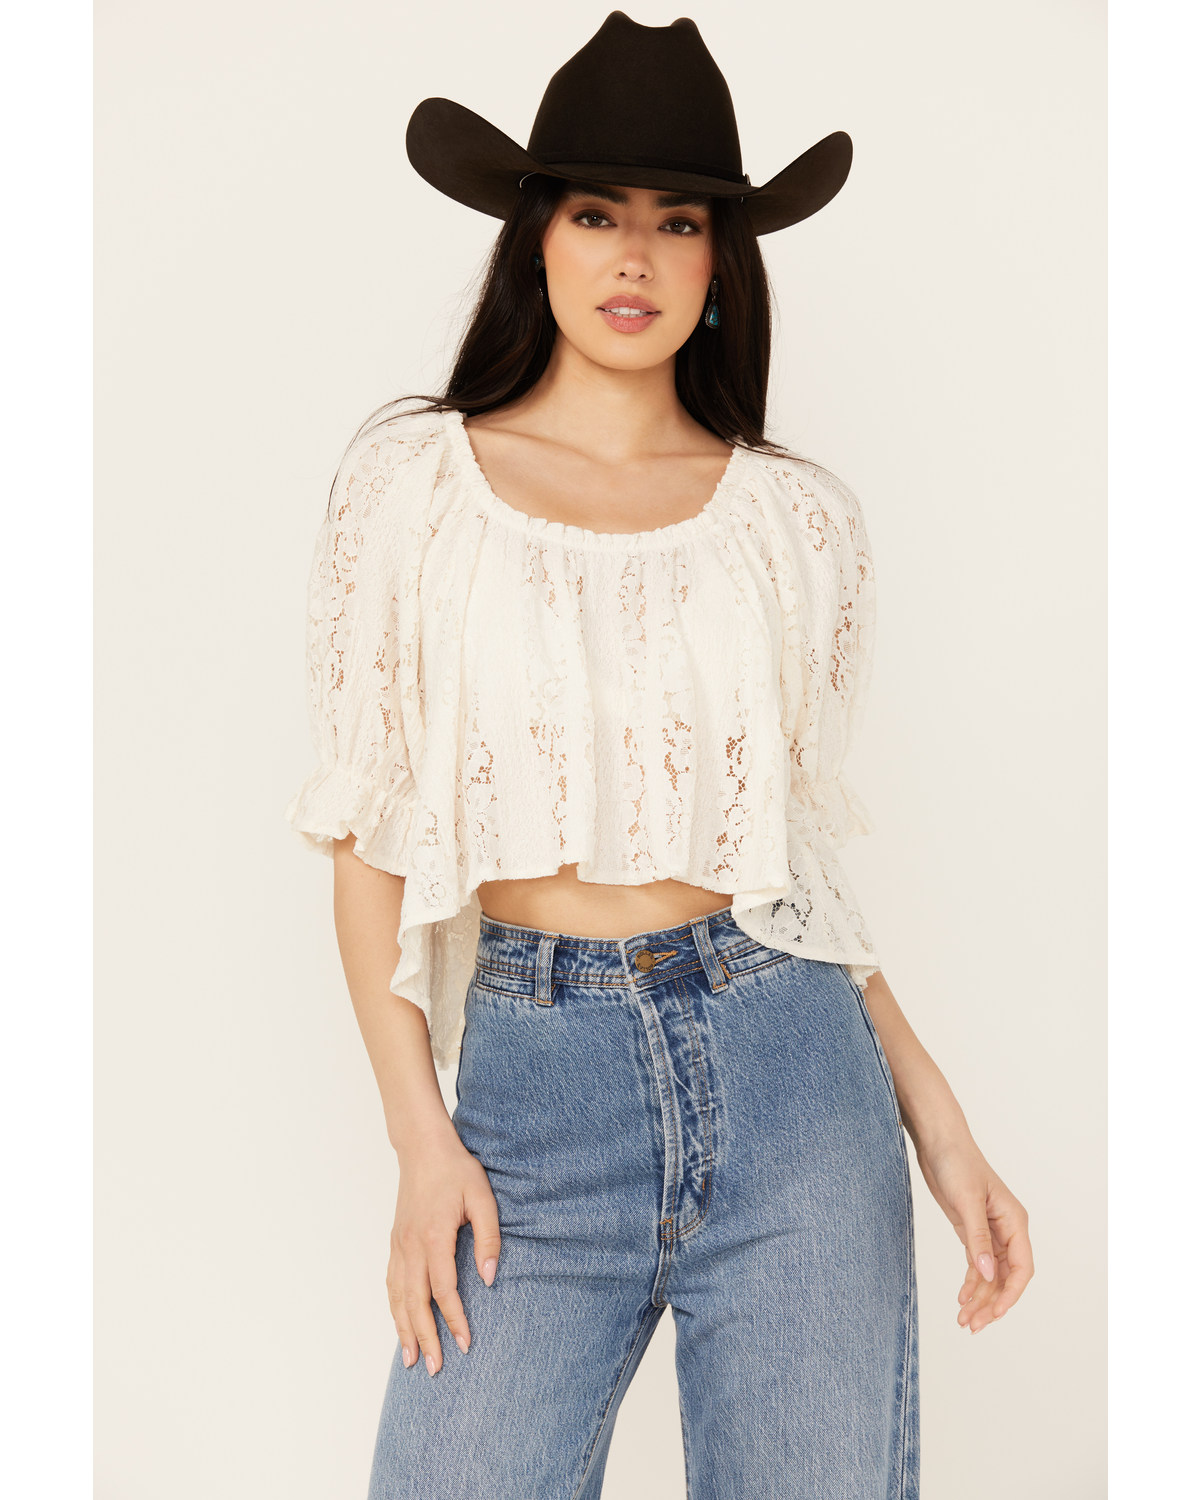 Free People Women's Stacey Lace Cropped Shirt